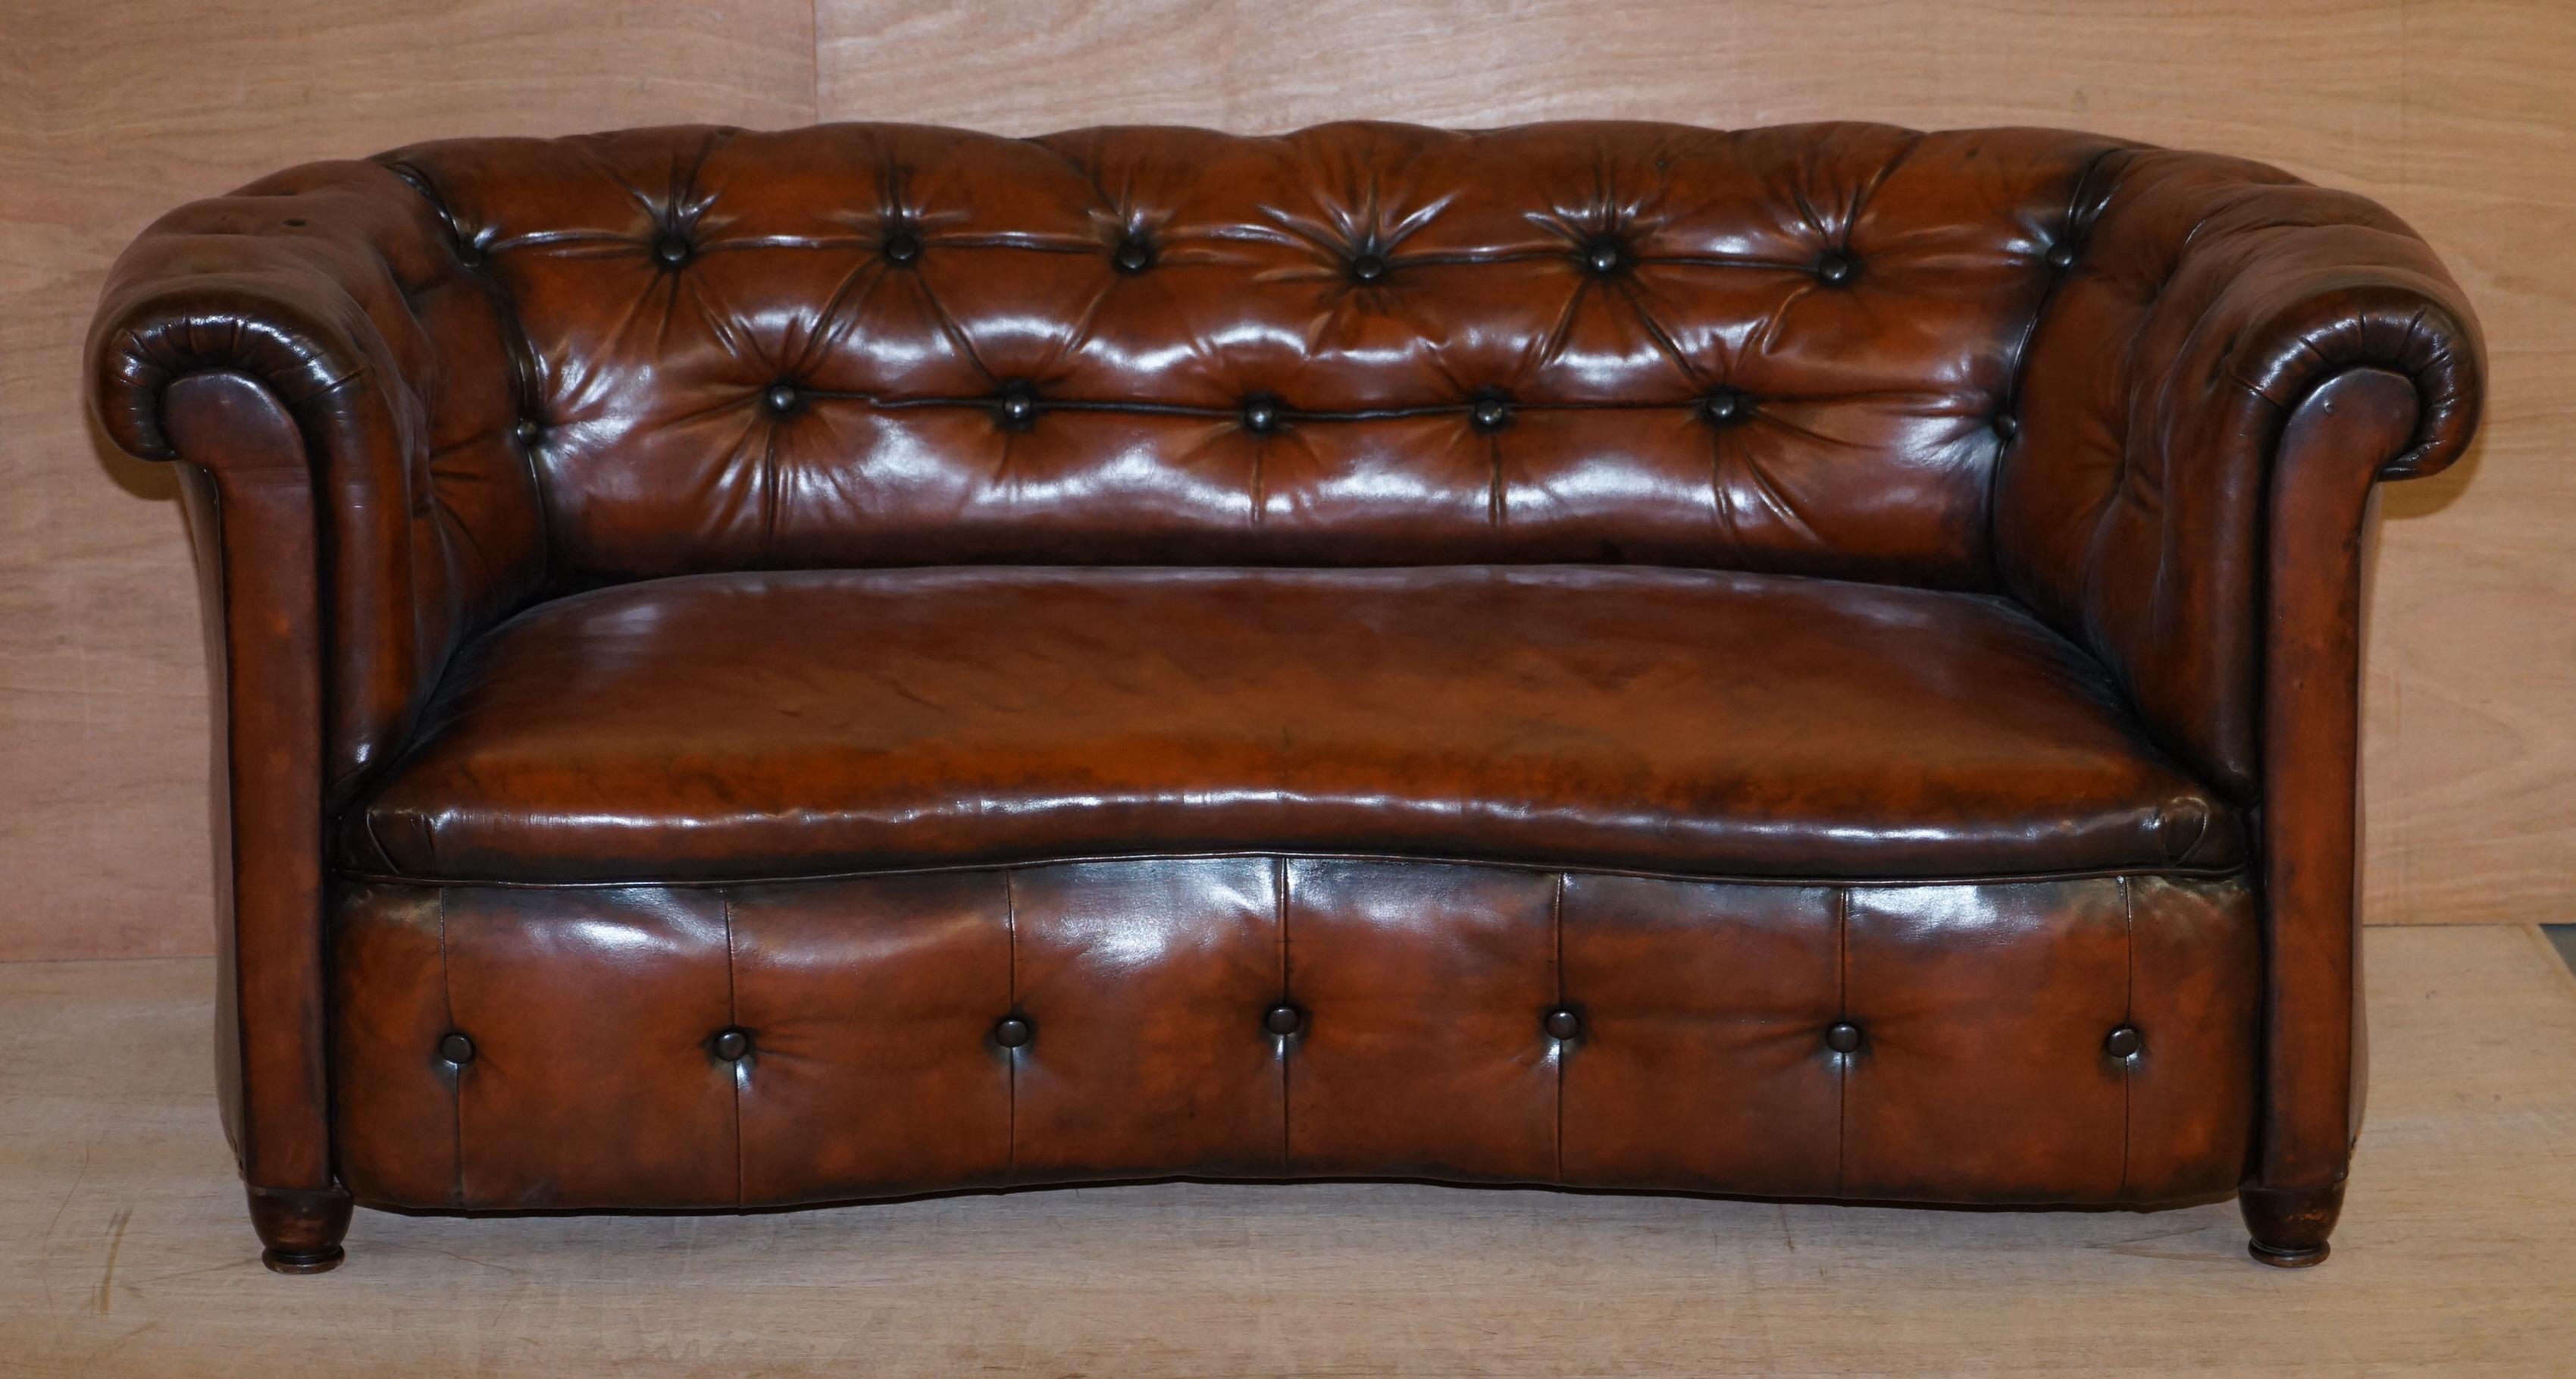 We are delighted to offer for sale this stunning fully restored Regency circa 1810-1820 hand dyed cigar brown leather serpentine fronted Chesterfield club sofa

This sofa is as rare as they come, it’s a period original Regency which is rare in its